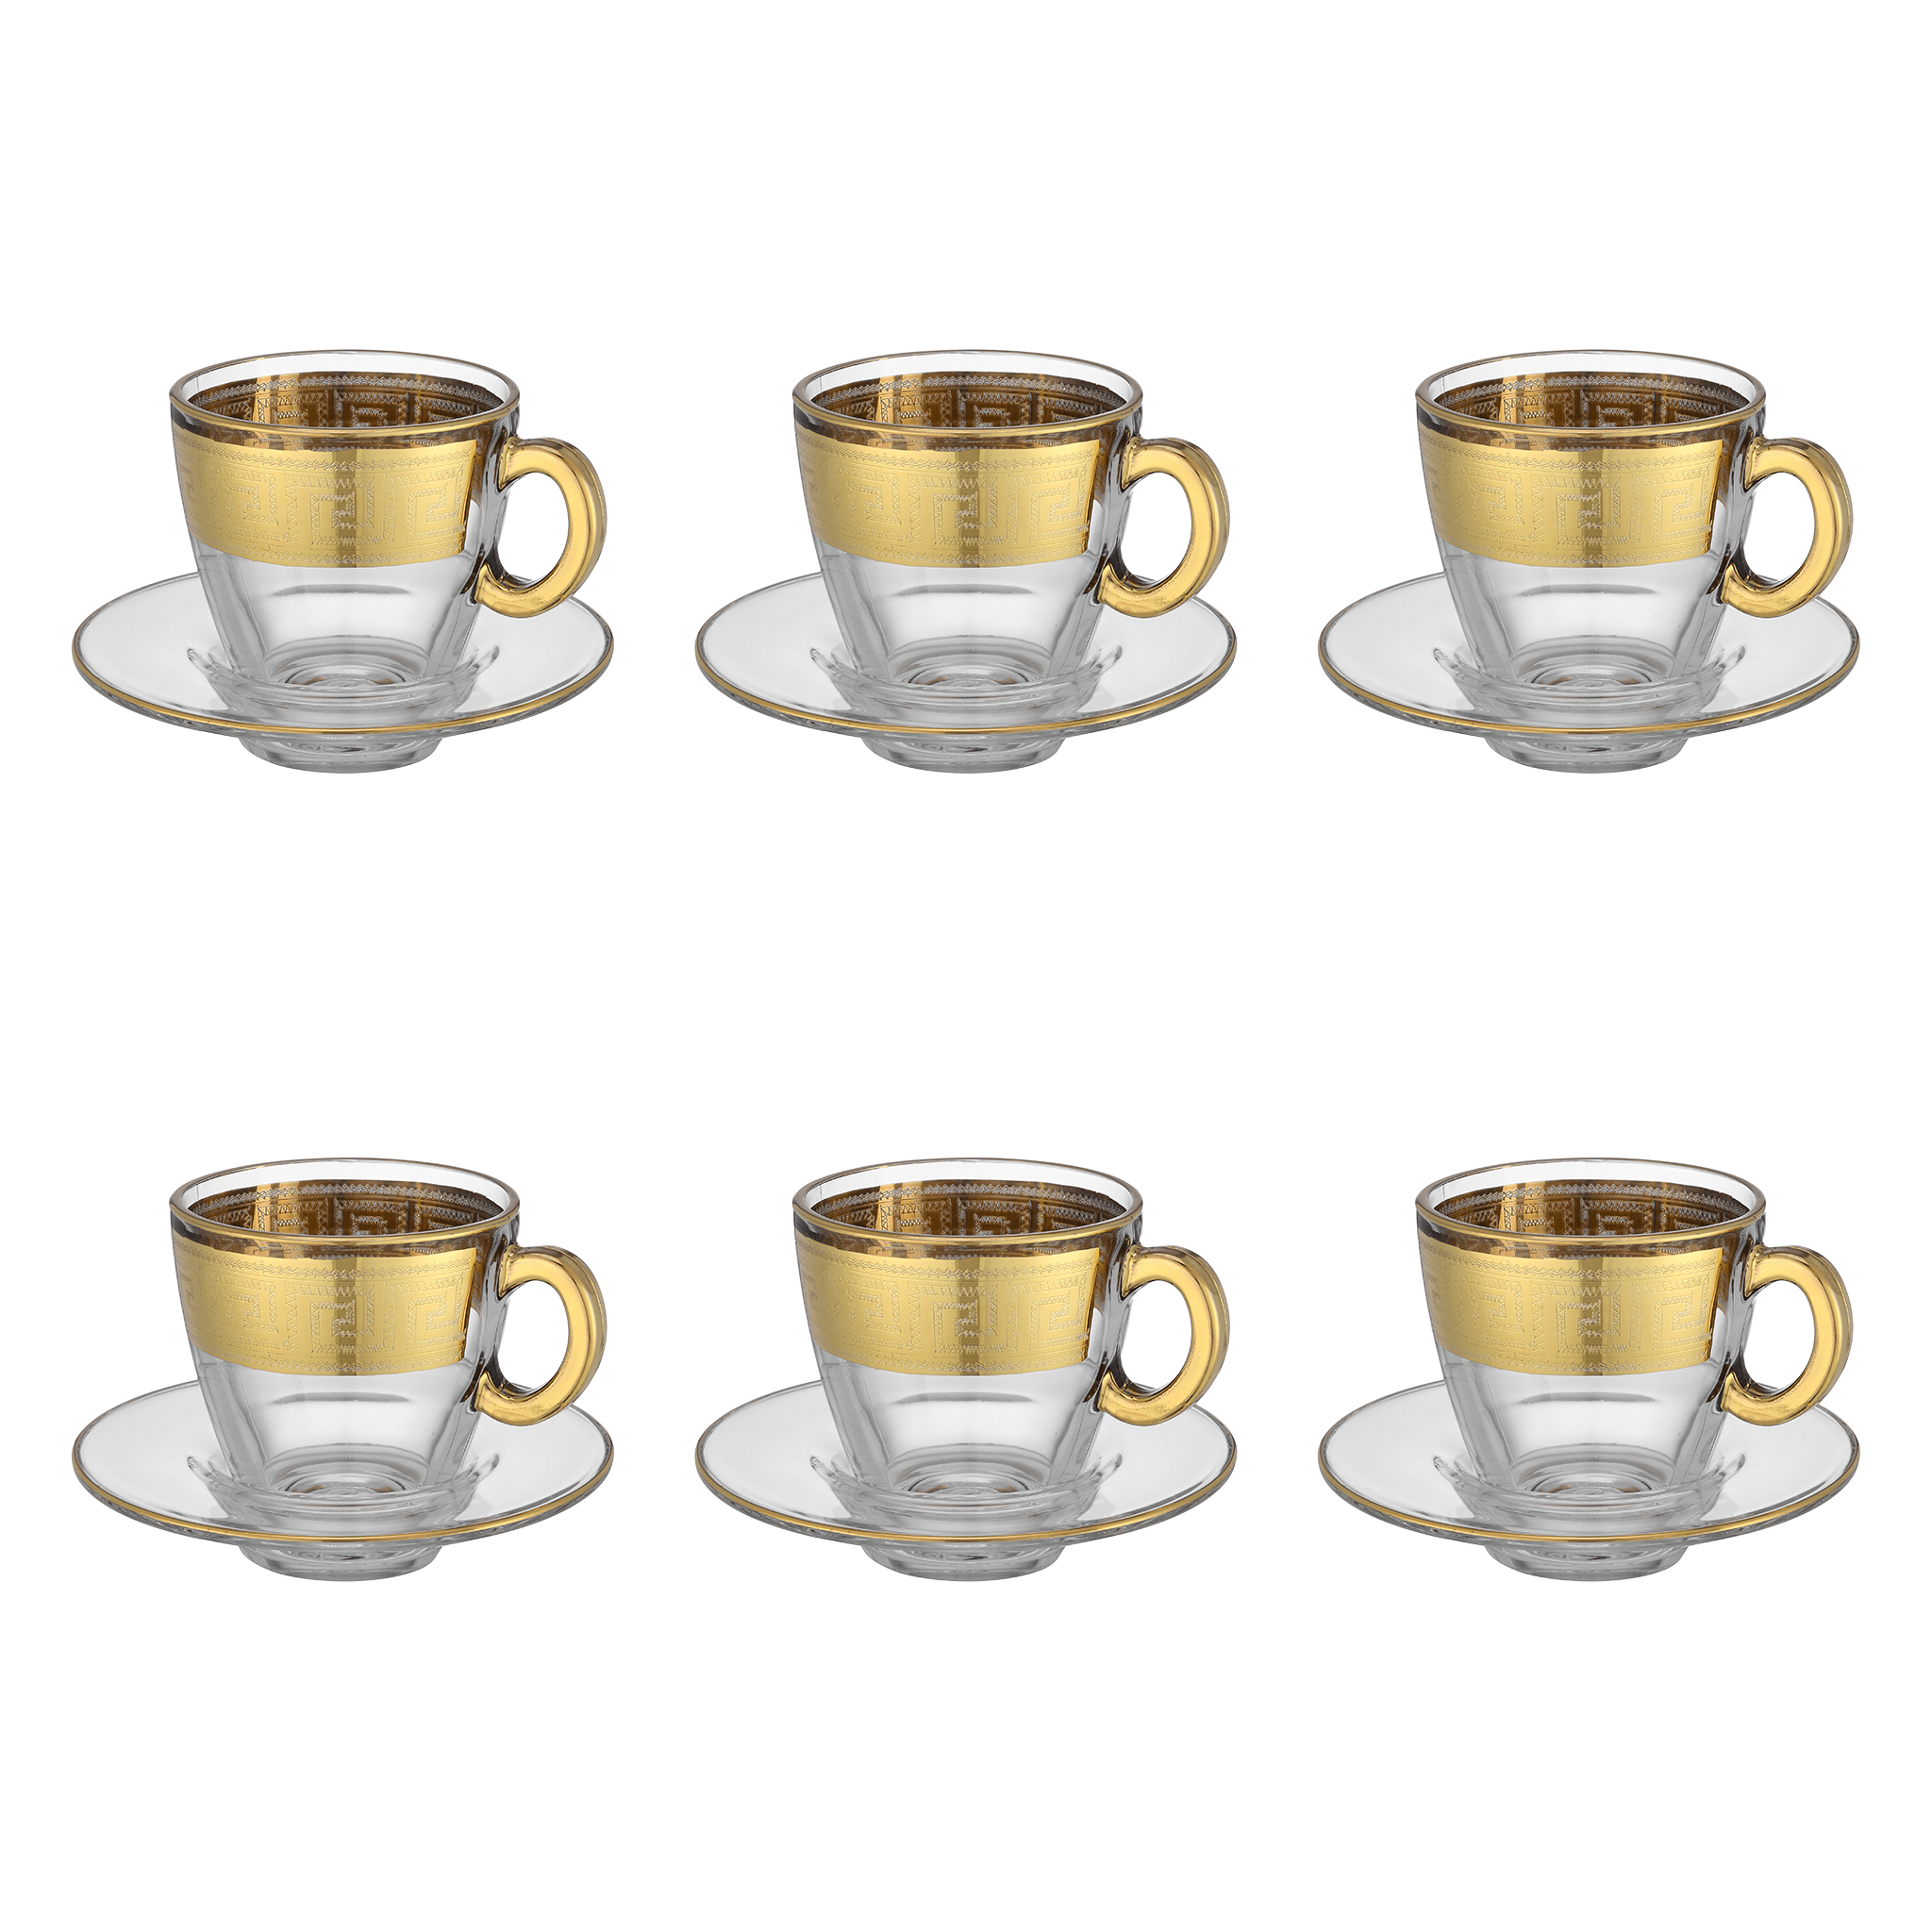 Pasabahce - Decorated Tea Cup with Saucer 6 Pieces - Gold - 160ml - Glass - 39000803